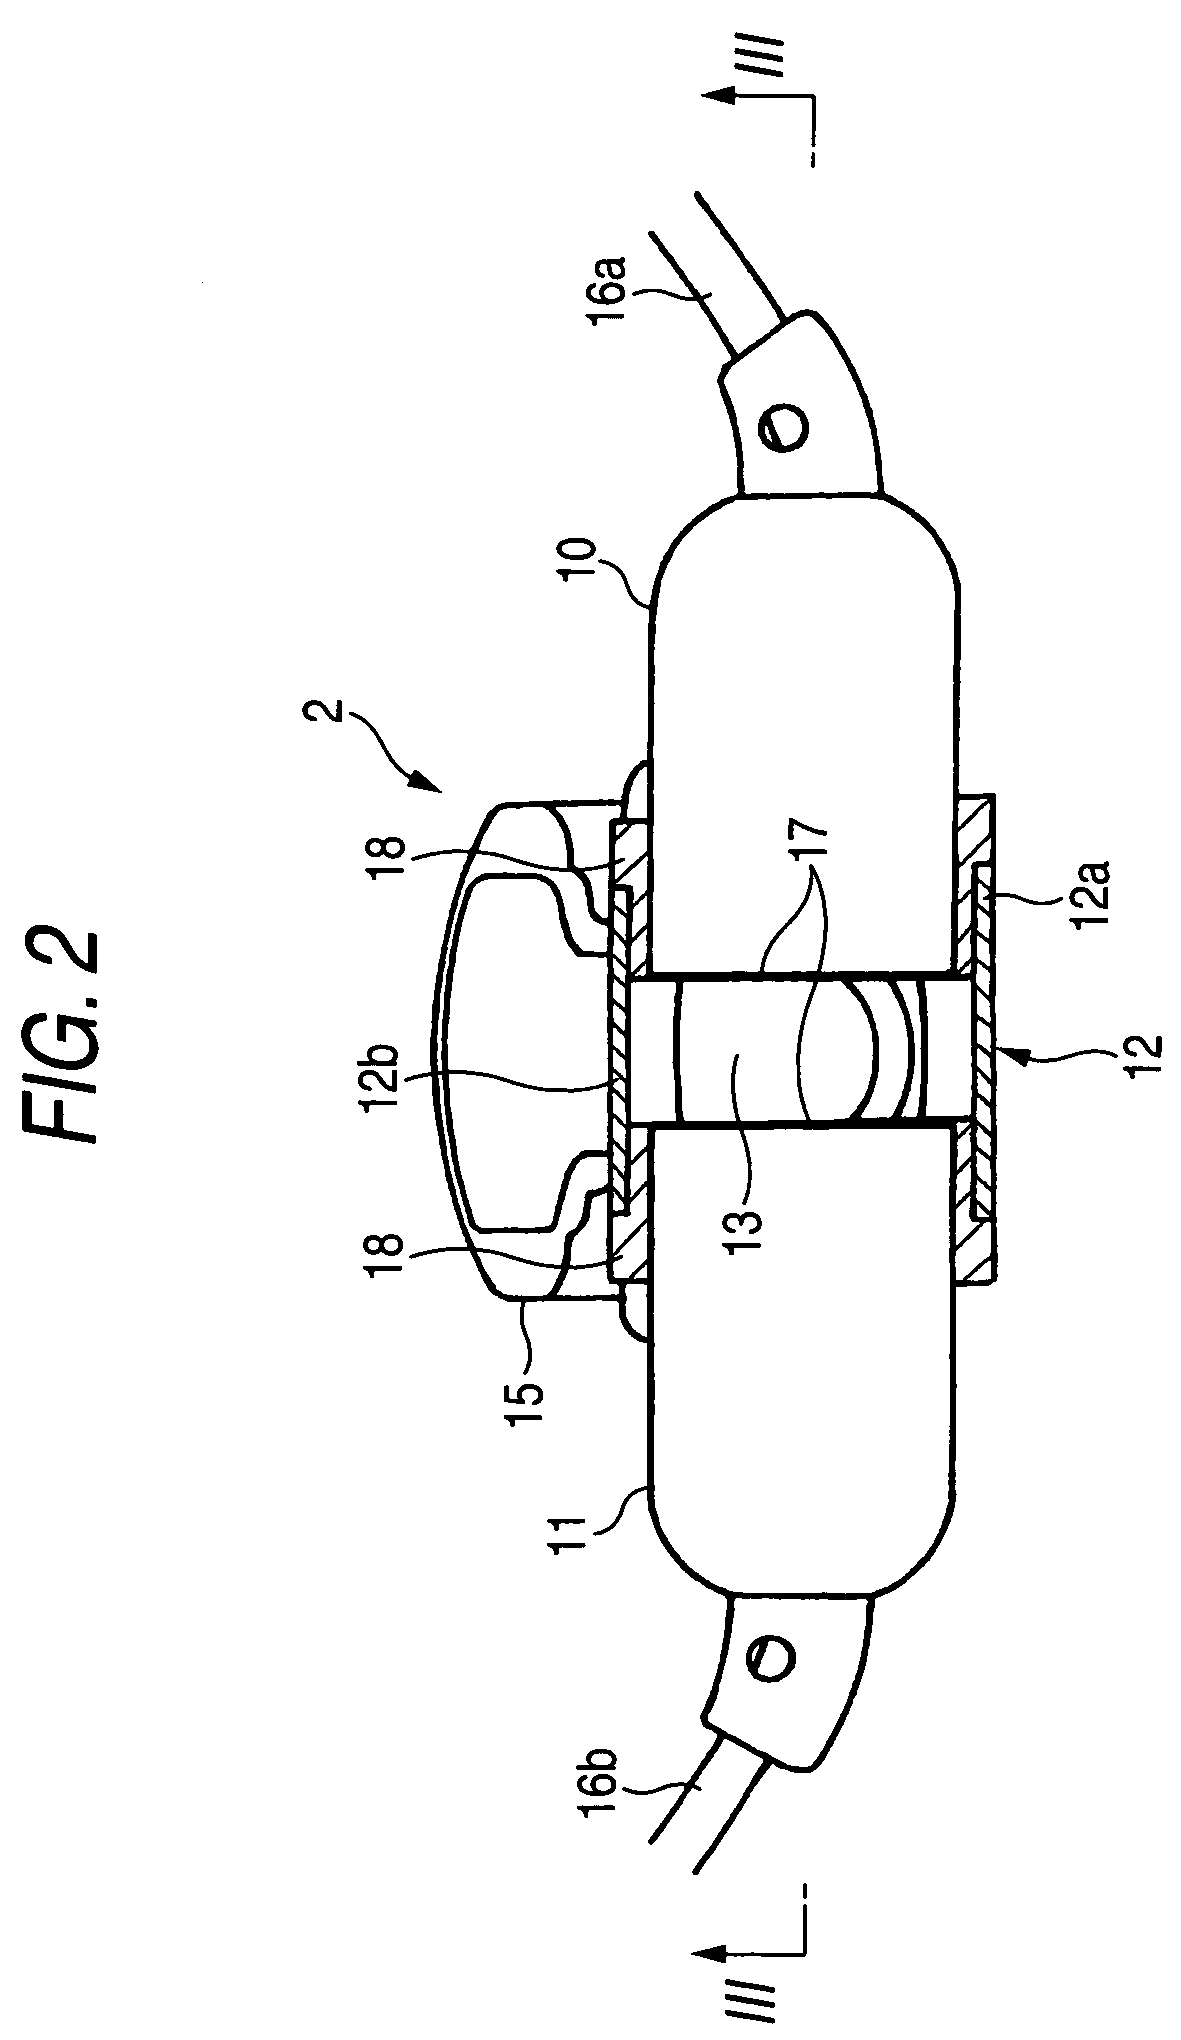 Carbon dioxide sensor and airway adapter incorporated in the same